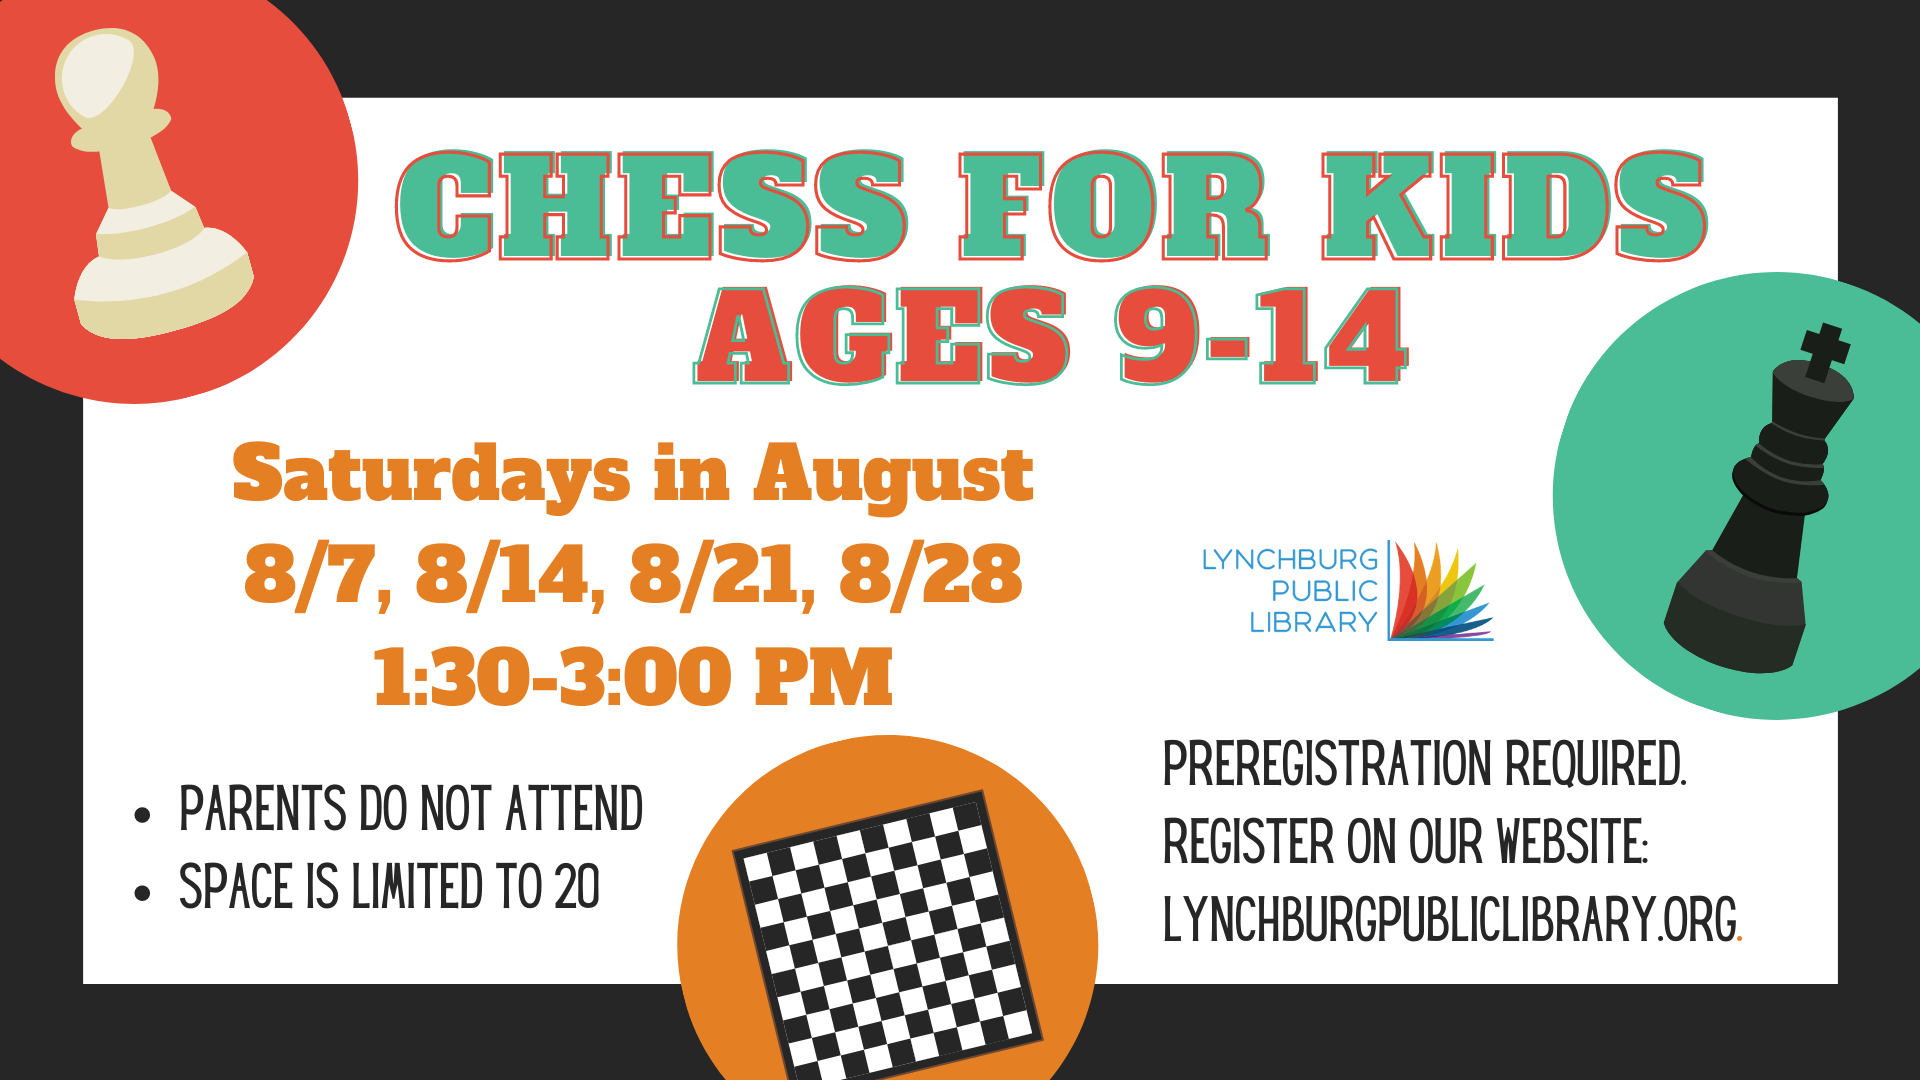 Images of chess pieces in circles surrounding information about LPL's Chess for Kids ages 9-14 Program for August 2021